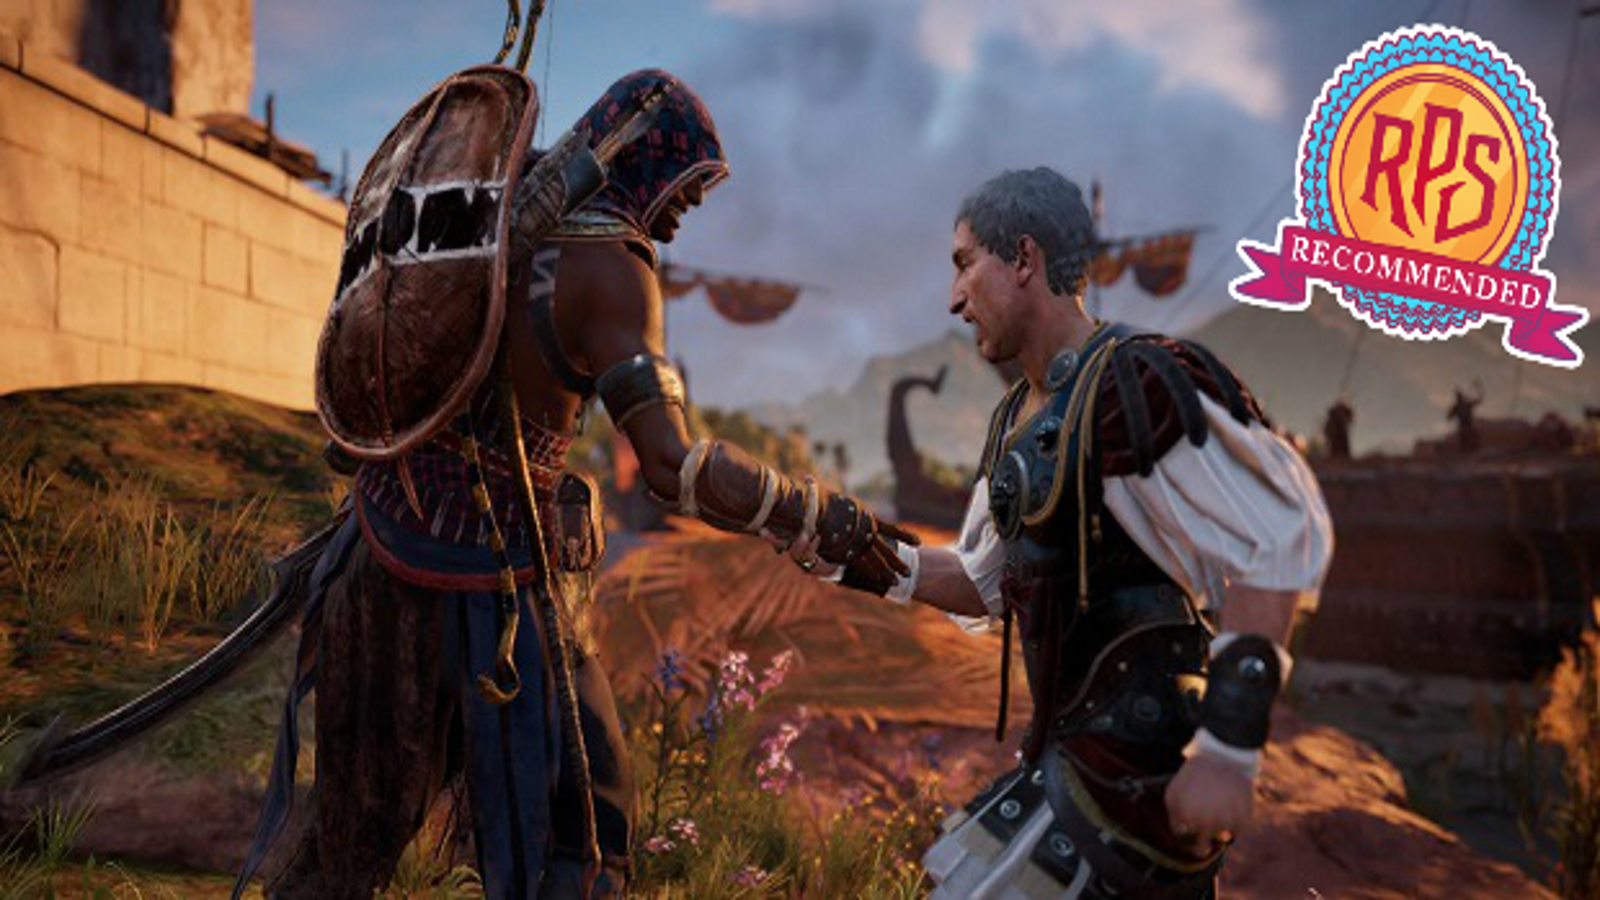 FREE STEAM ACCOUNT with Assassin's Creed Origins 